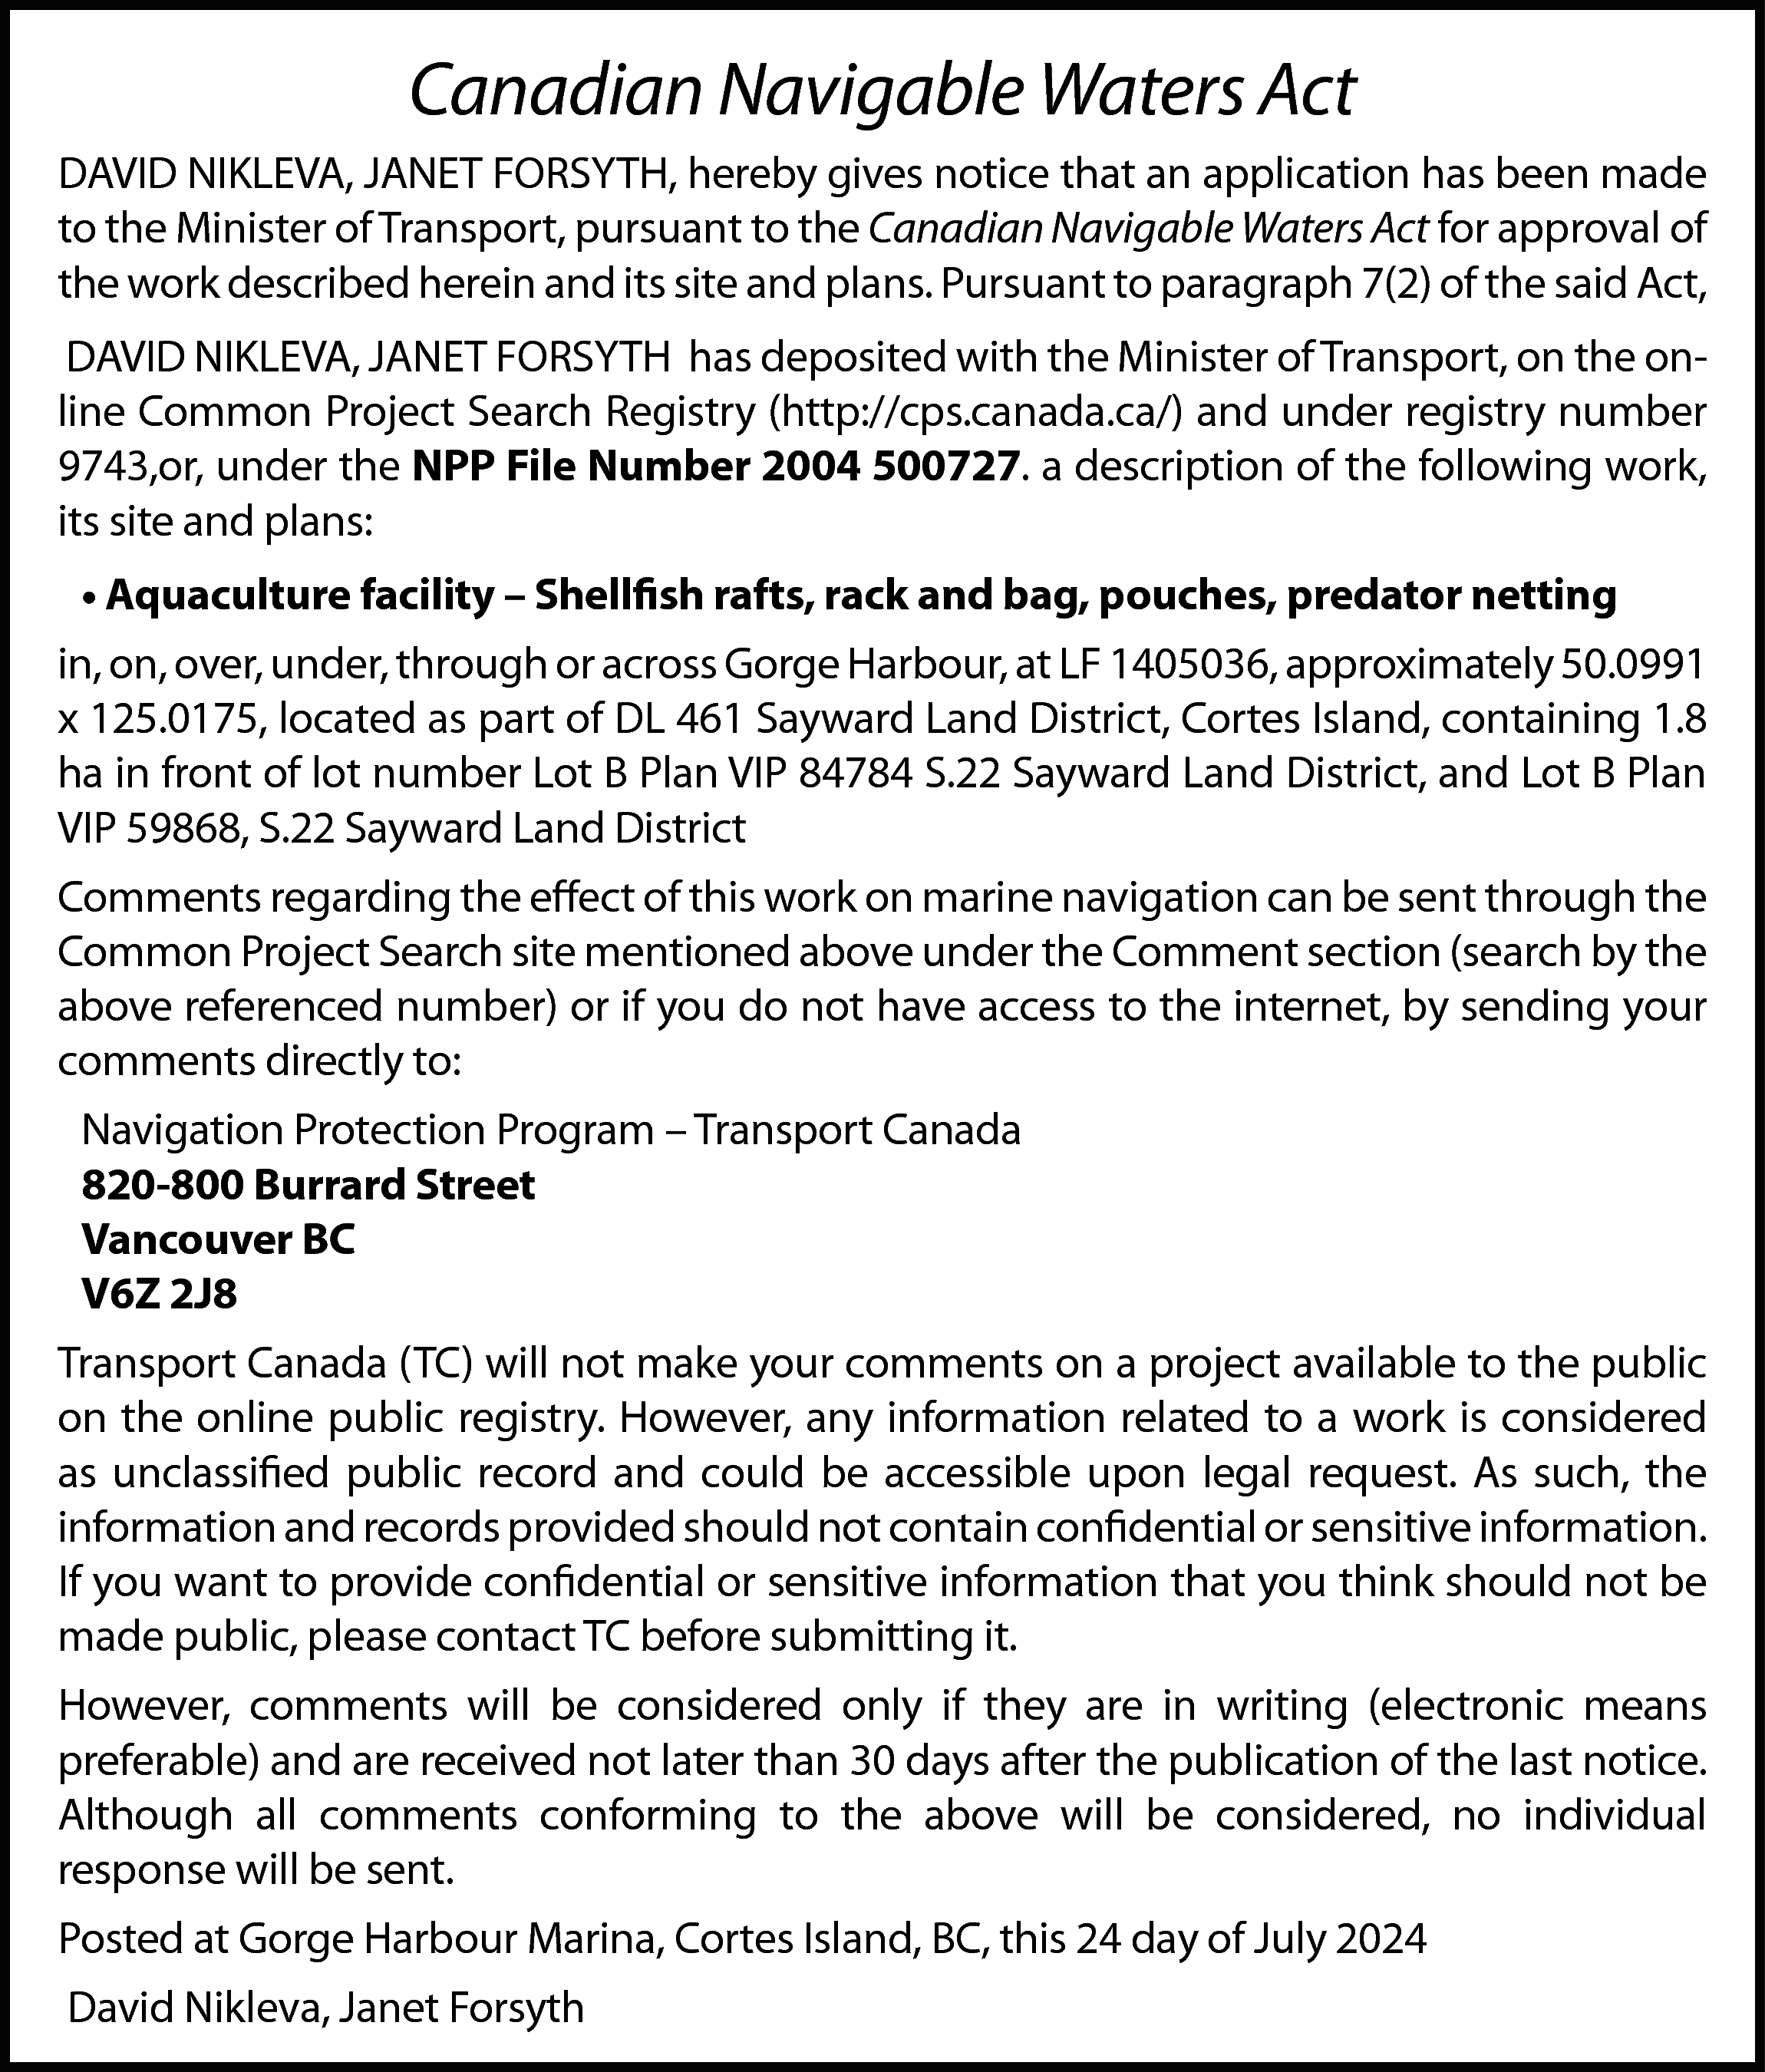 Canadian Navigable Waters Act <br>DAVID  Canadian Navigable Waters Act  DAVID NIKLEVA, JANET FORSYTH, hereby gives notice that an application has been made  to the Minister of Transport, pursuant to the Canadian Navigable Waters Act for approval of  the work described herein and its site and plans. Pursuant to paragraph 7(2) of the said Act,  DAVID NIKLEVA, JANET FORSYTH has deposited with the Minister of Transport, on the online Common Project Search Registry (http://cps.canada.ca/) and under registry number  9743,or, under the NPP File Number 2004 500727. a description of the following work,  its site and plans:  • Aquaculture facility – Shellfish rafts, rack and bag, pouches, predator netting  in, on, over, under, through or across Gorge Harbour, at LF 1405036, approximately 50.0991  x 125.0175, located as part of DL 461 Sayward Land District, Cortes Island, containing 1.8  ha in front of lot number Lot B Plan VIP 84784 S.22 Sayward Land District, and Lot B Plan  VIP 59868, S.22 Sayward Land District  Comments regarding the effect of this work on marine navigation can be sent through the  Common Project Search site mentioned above under the Comment section (search by the  above referenced number) or if you do not have access to the internet, by sending your  comments directly to:  Navigation Protection Program – Transport Canada  820-800 Burrard Street  Vancouver BC  V6Z 2J8  Transport Canada (TC) will not make your comments on a project available to the public  on the online public registry. However, any information related to a work is considered  as unclassified public record and could be accessible upon legal request. As such, the  information and records provided should not contain confidential or sensitive information.  If you want to provide confidential or sensitive information that you think should not be  made public, please contact TC before submitting it.  However, comments will be considered only if they are in writing (electronic means  preferable) and are received not later than 30 days after the publication of the last notice.  Although all comments conforming to the above will be considered, no individual  response will be sent.  Posted at Gorge Harbour Marina, Cortes Island, BC, this 24 day of July 2024  David Nikleva, Janet Forsyth    